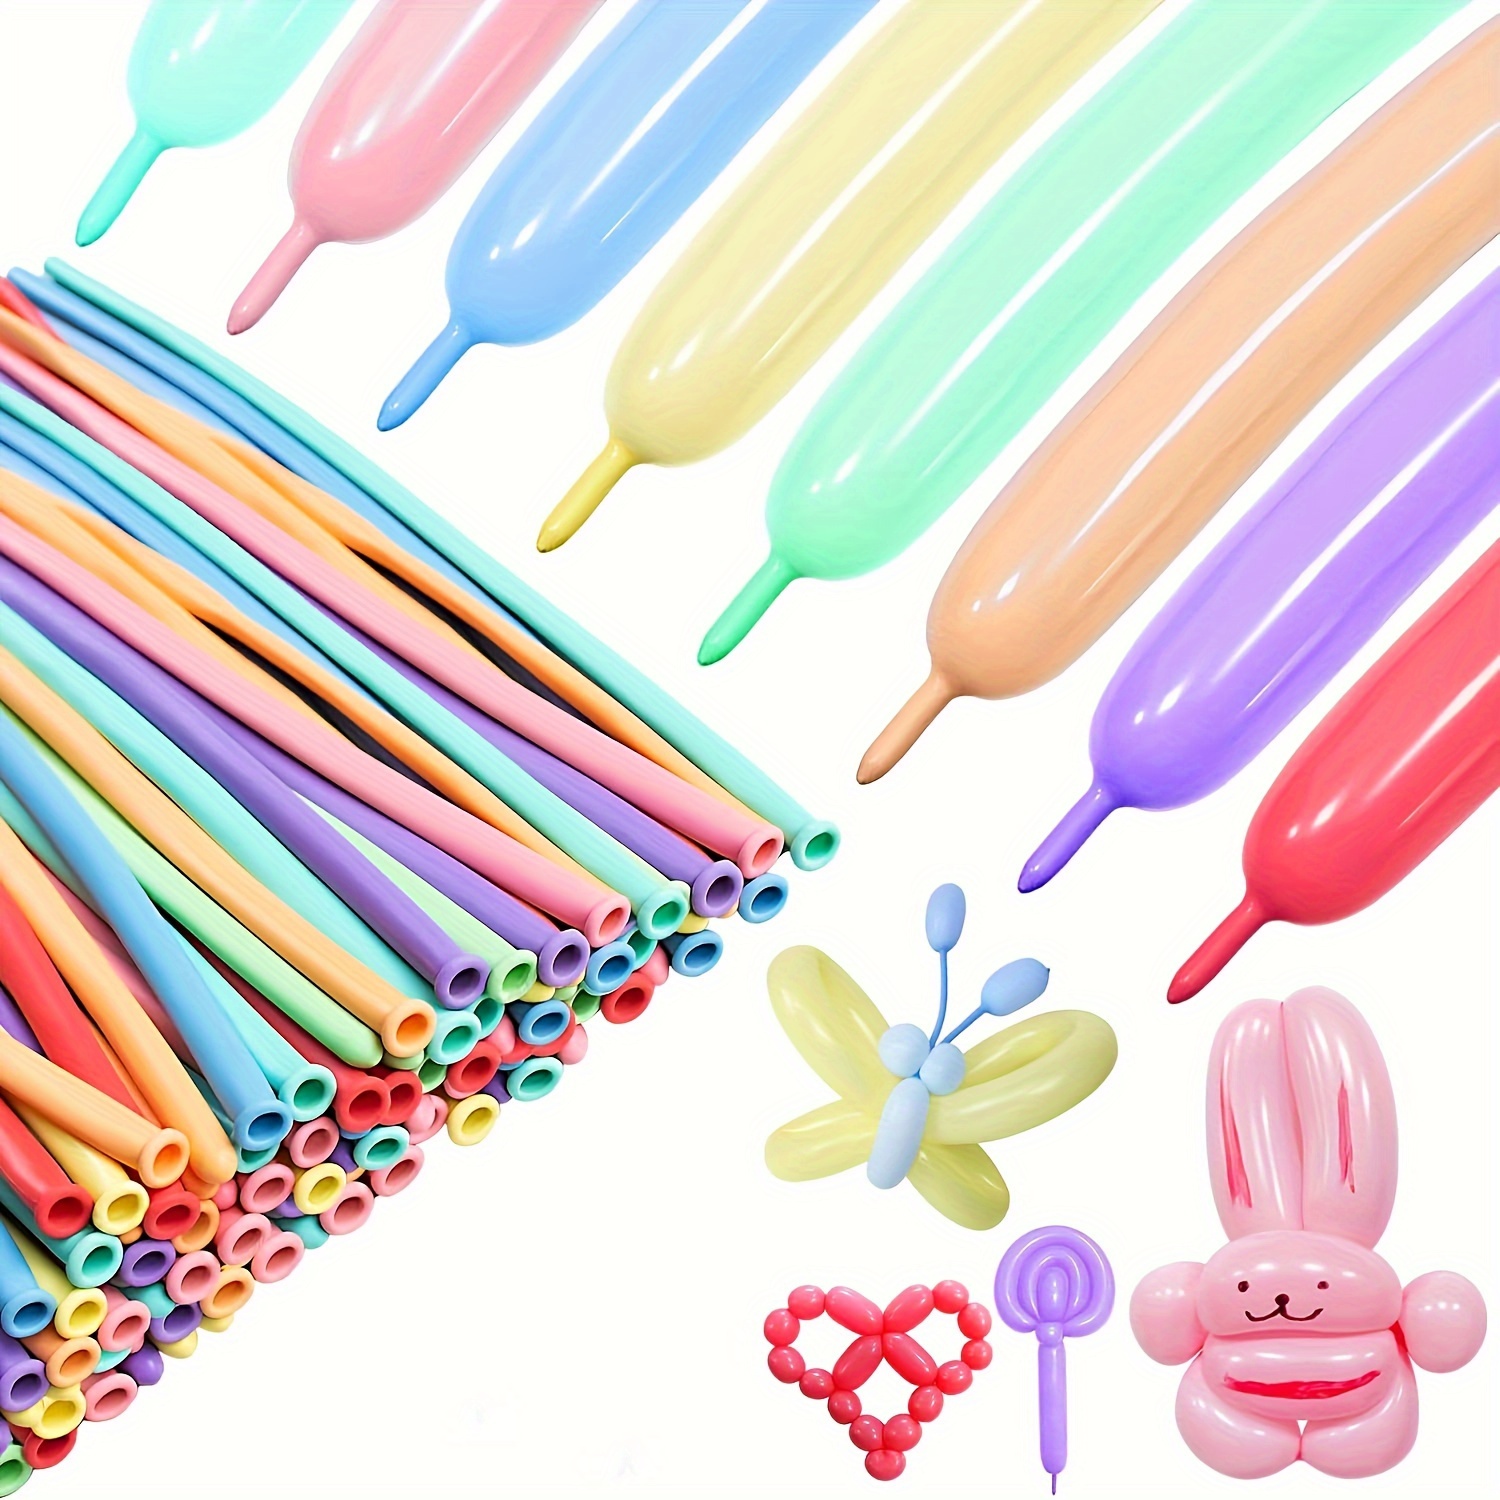 

100-piece Assorted Long Strip Balloons - Macaron Colors, Versatile Shapes, Thick & Explosion-proof For Christmas & New Year's Party Decorations